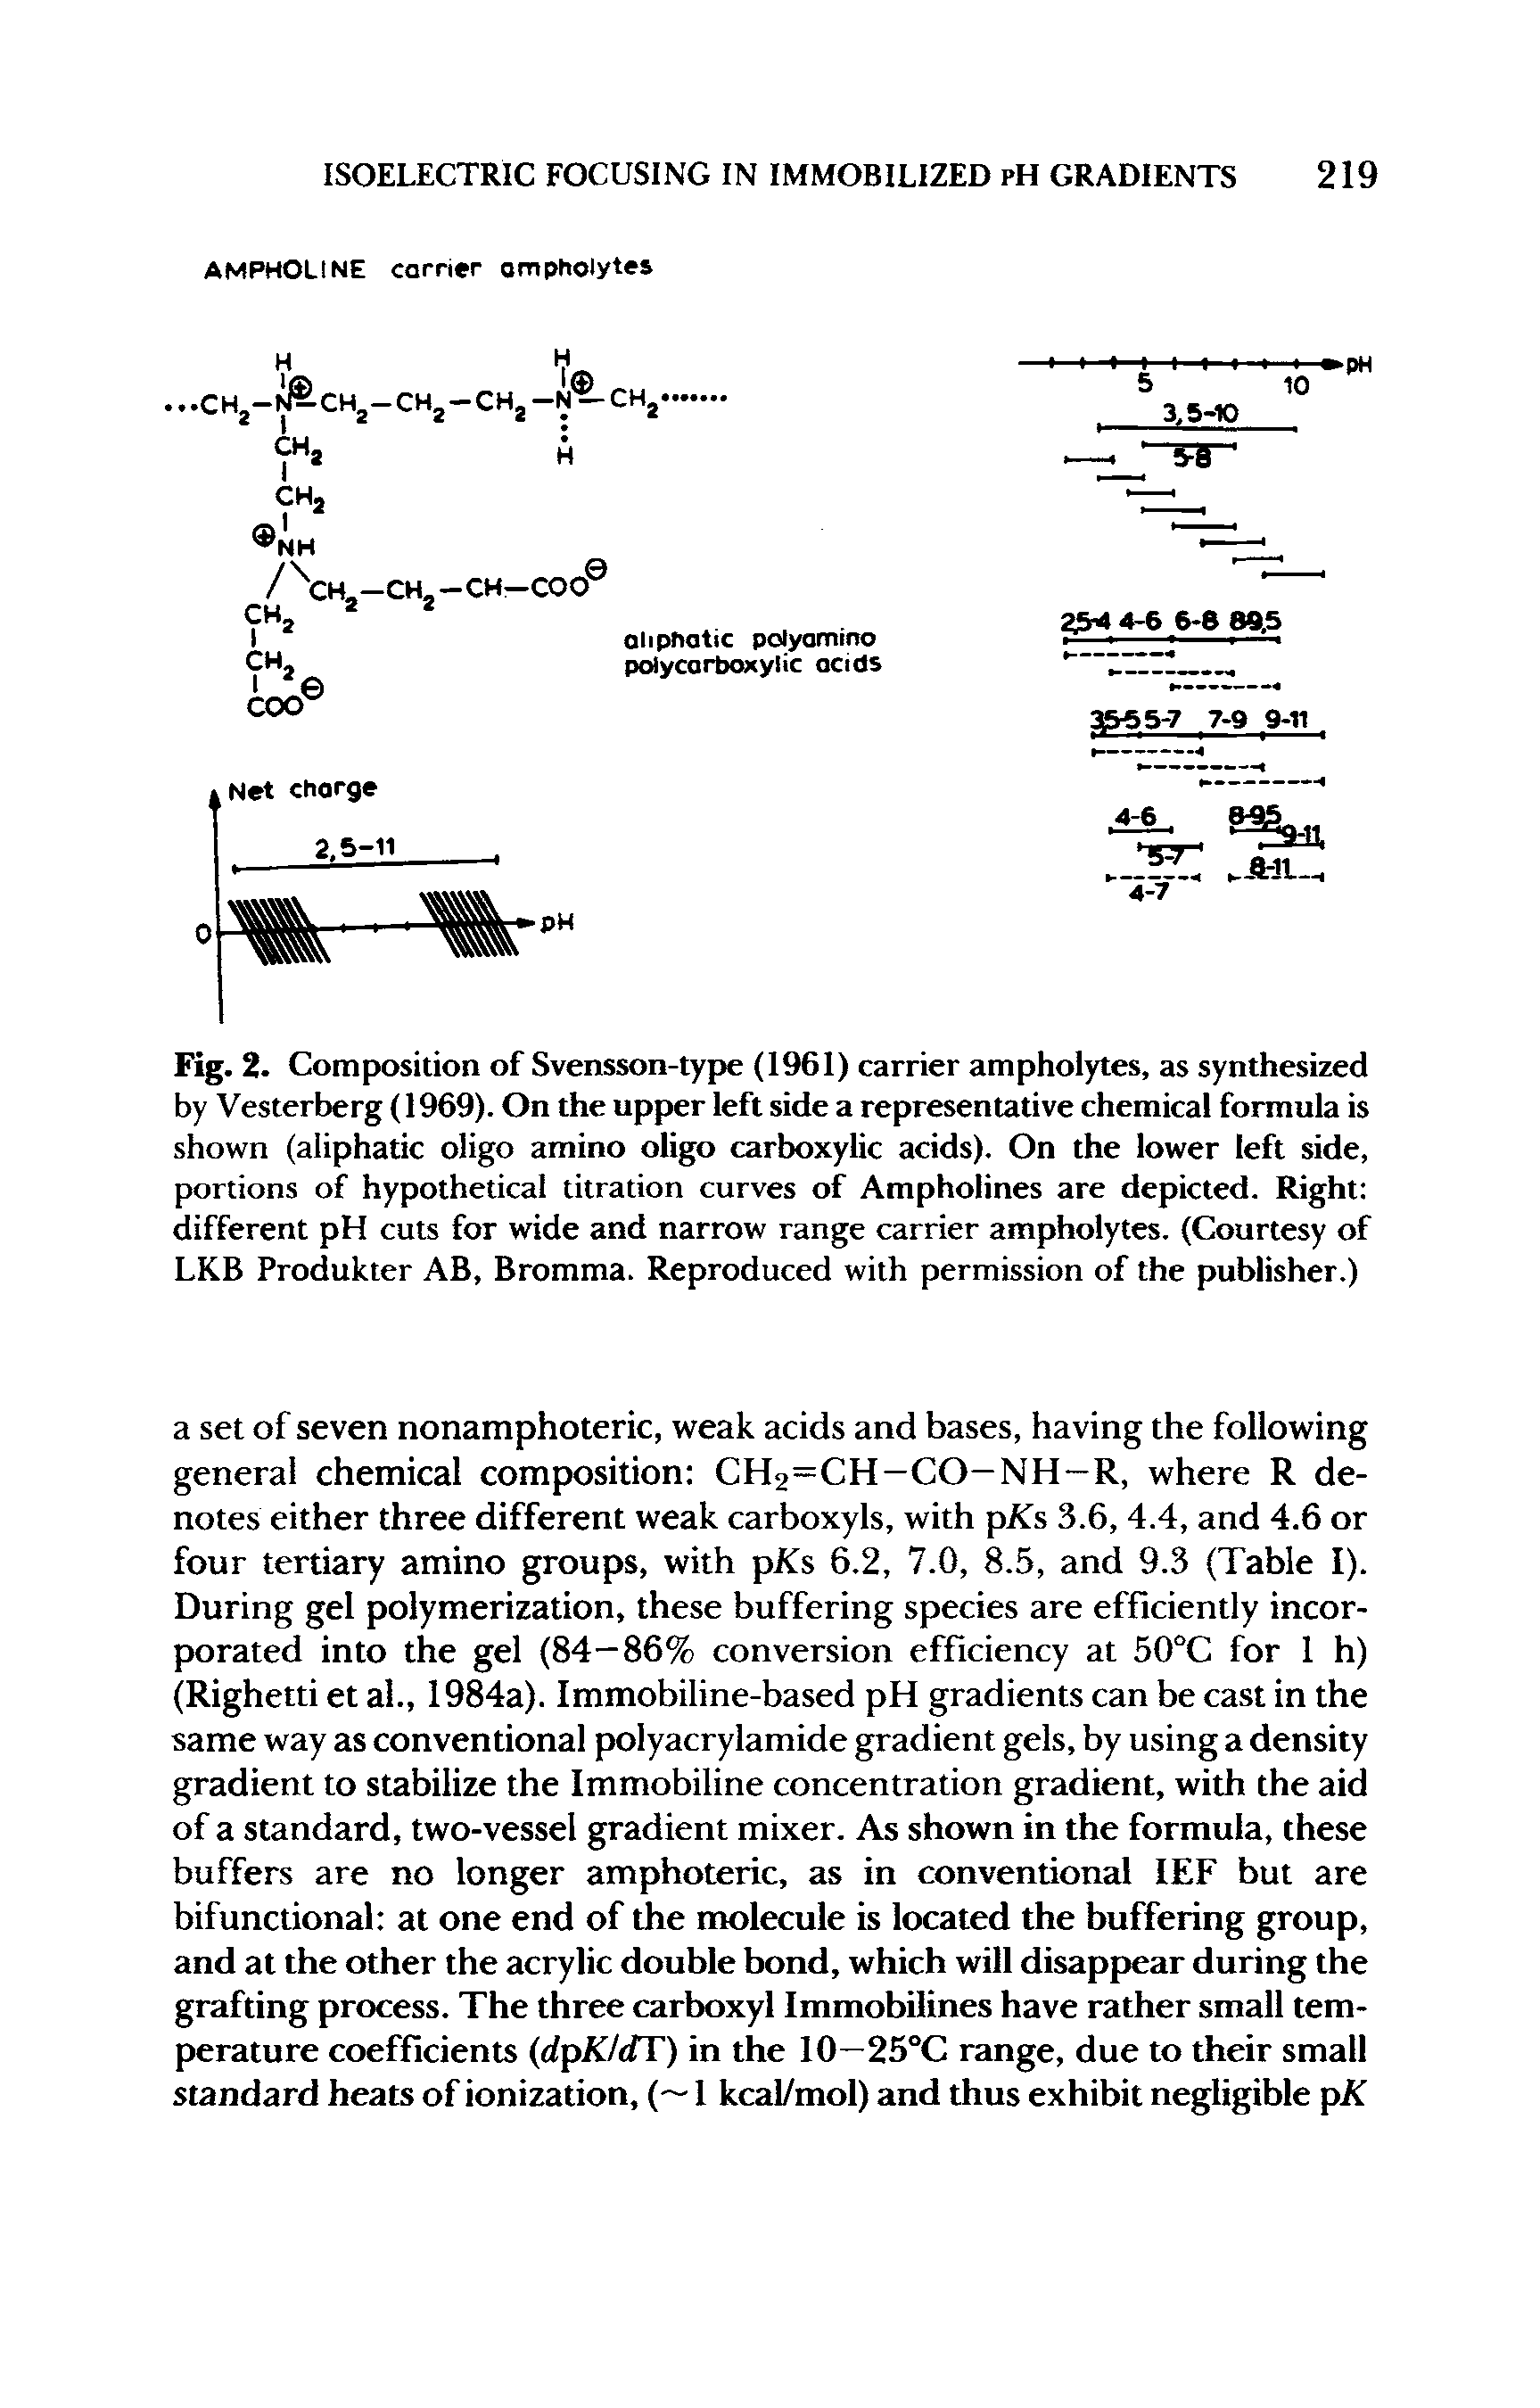 Fig. 2. Composition of Svensson-type (1961) carrier ampholytes, as synthesized by Vesterberg (1969). On the upper left side a representative chemical formula is shown (aliphatic oligo amino oligo carboxylic acids). On the lower left side, portions of hypothetical titration curves of Ampholines are depicted. Right different pH cuts for wide and narrow range carrier ampholytes. (Courtesy of LKB Produkter AB, Bromma. Reproduced with permission of the publisher.)...